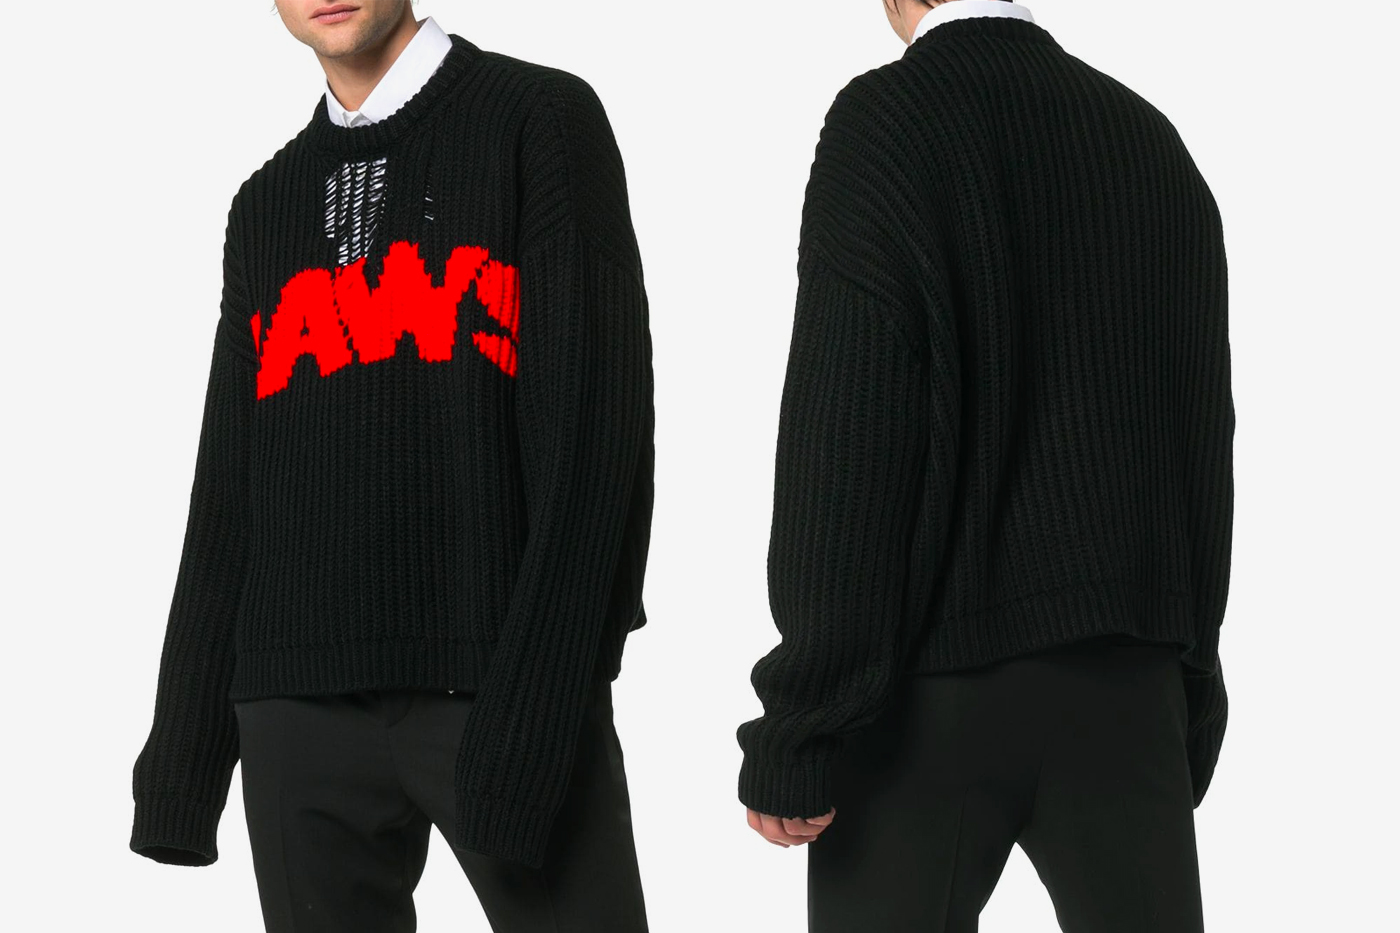 Calvin Klein 205W39NYC 'Jaws' Knitted Sweater | Drops | Hypebeast